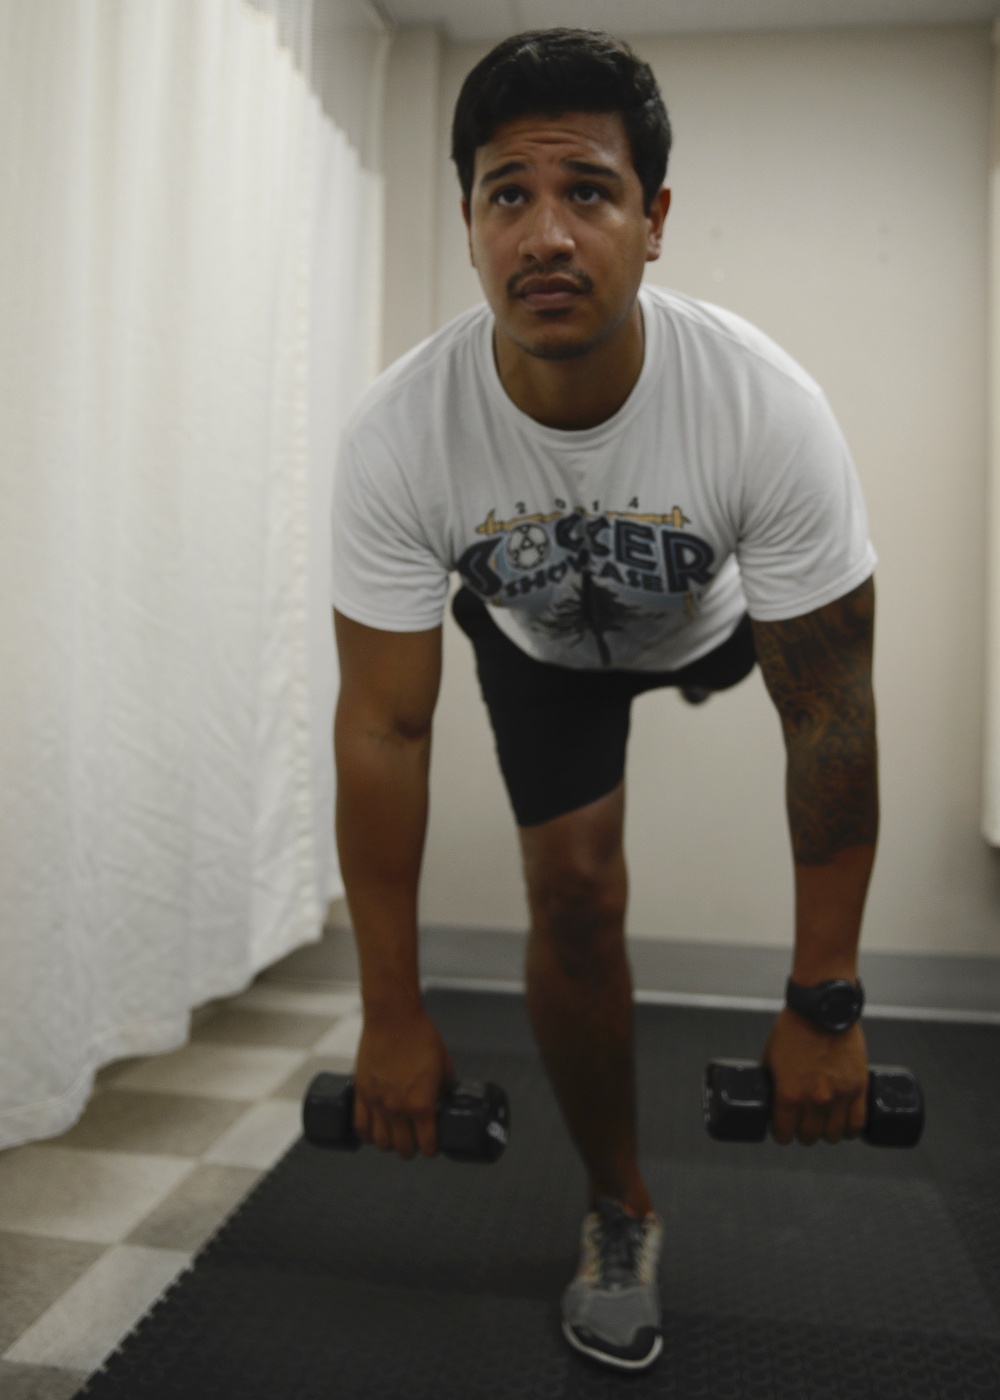 Injured athlete finds passion through treatment